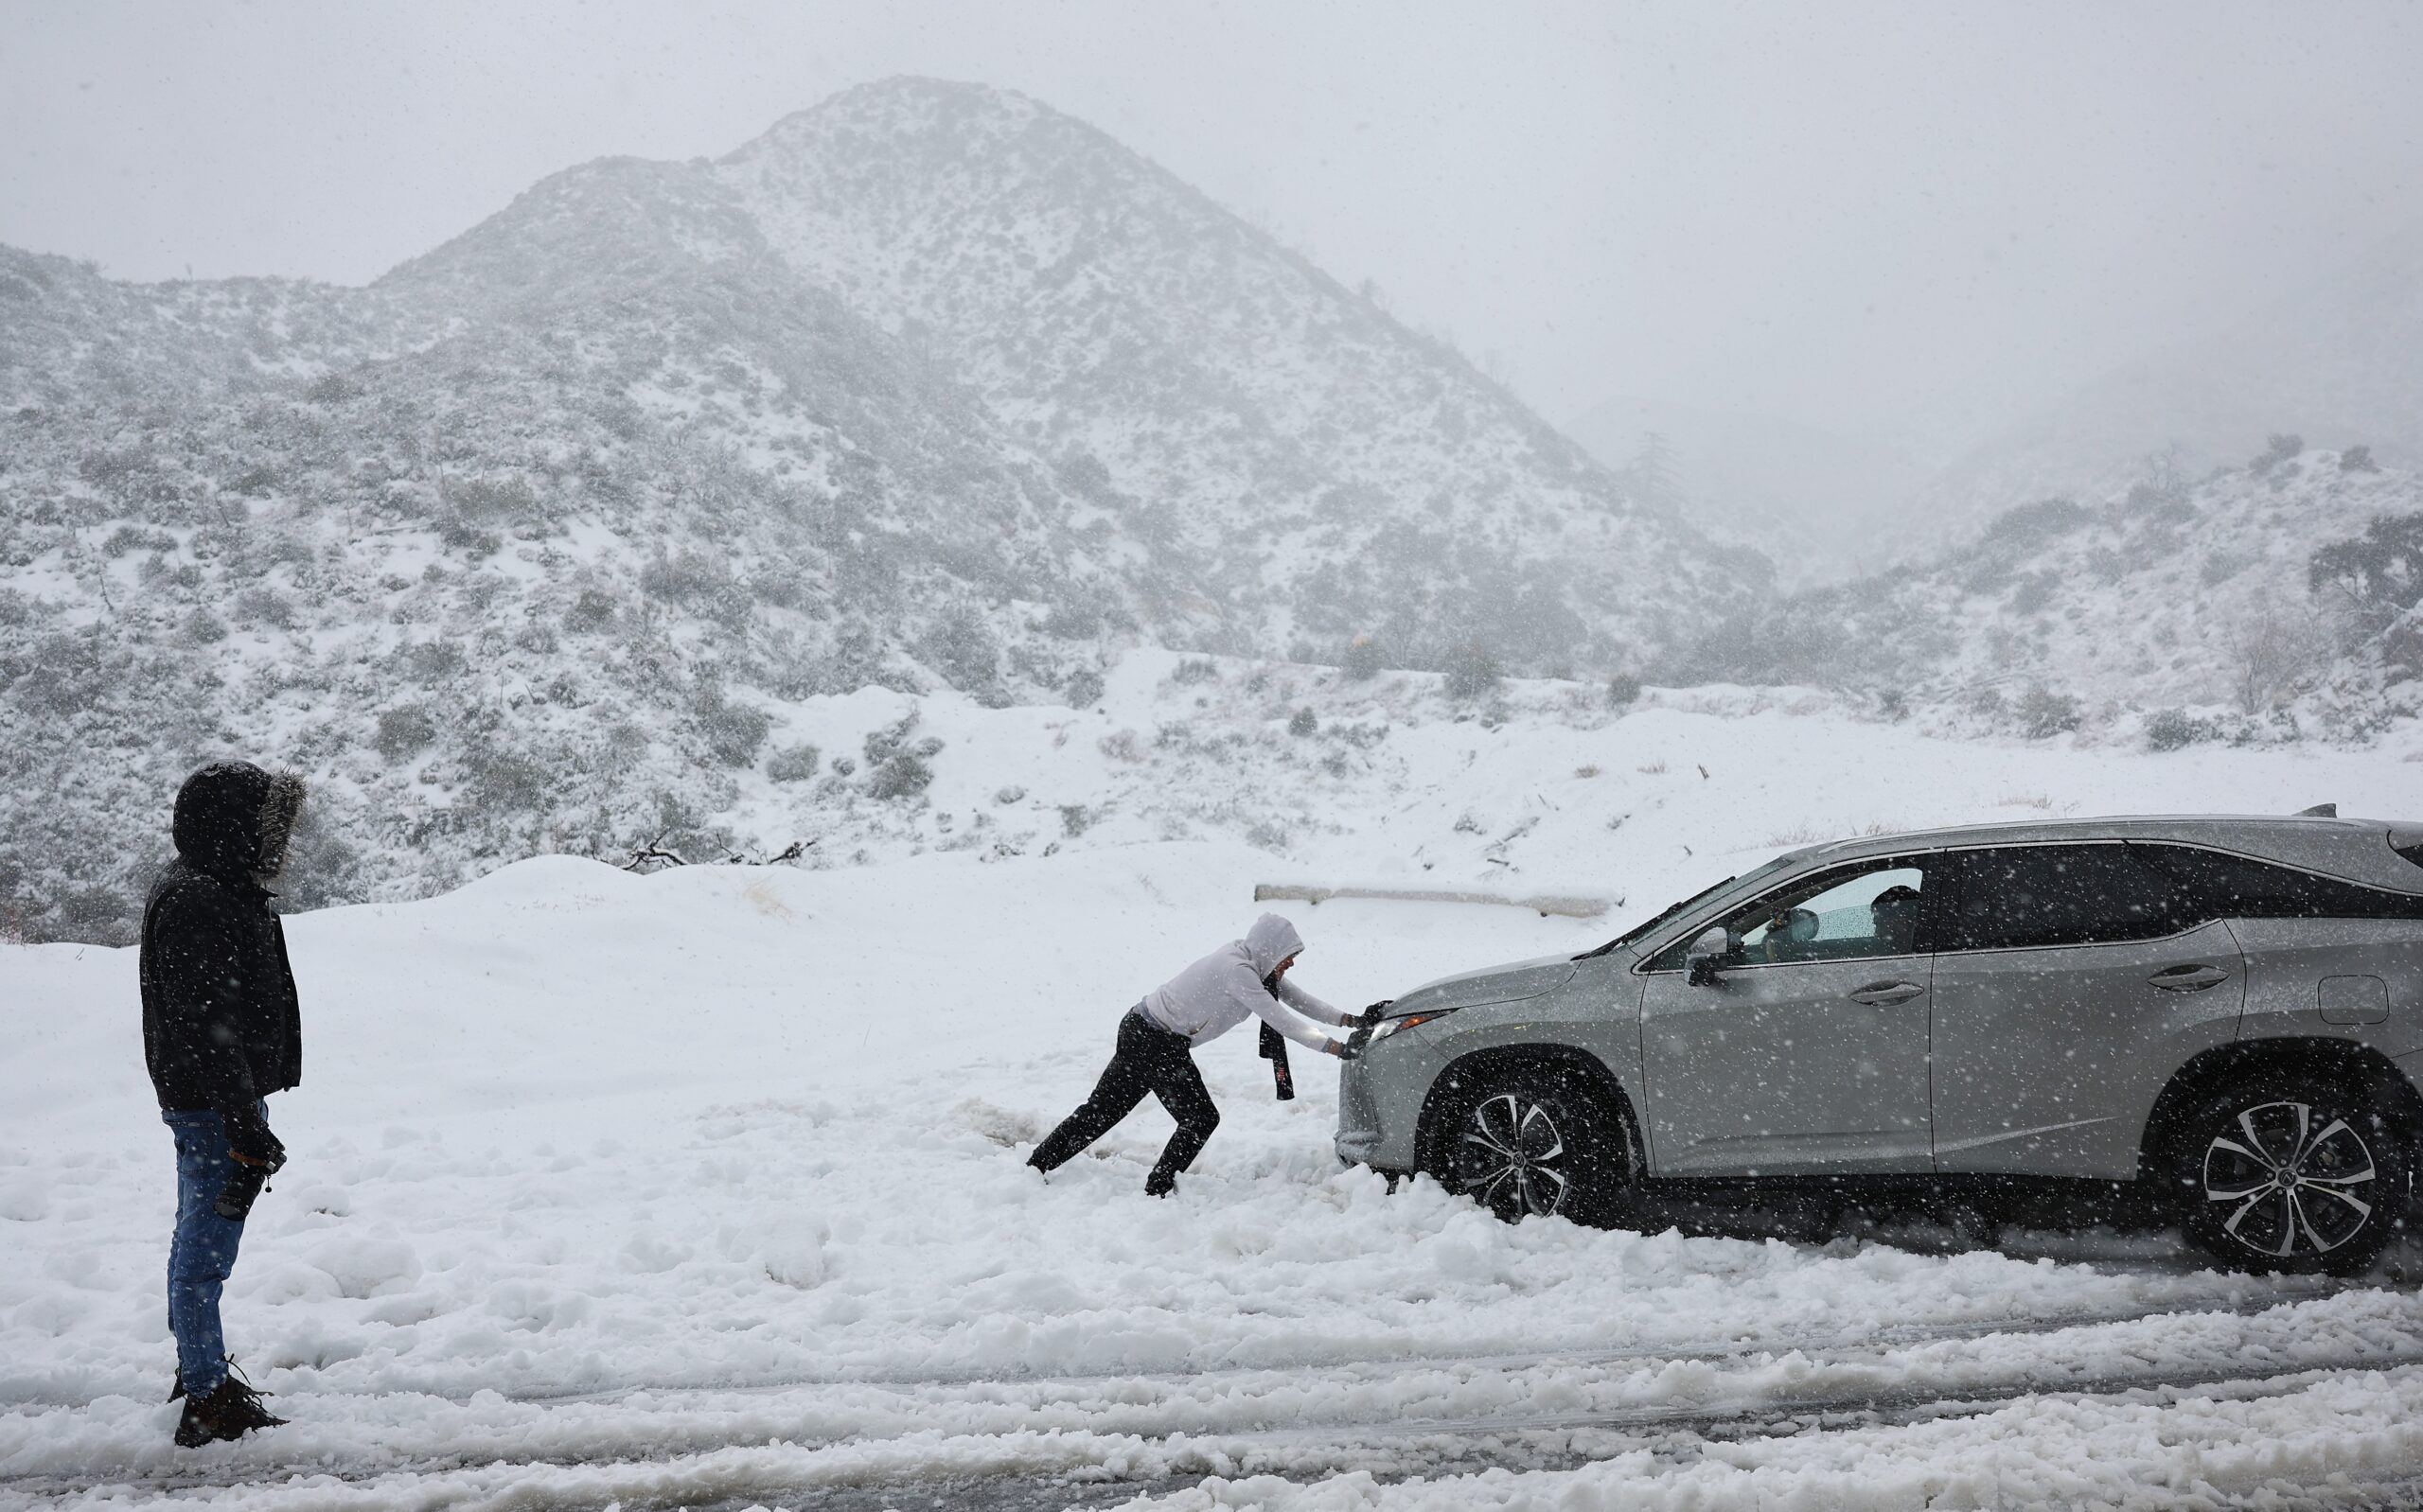 LA CANADA FLINTRIDGE, CALIFORNIA - FEBRUARY 24: A person helps push out a car that became stuck in ...